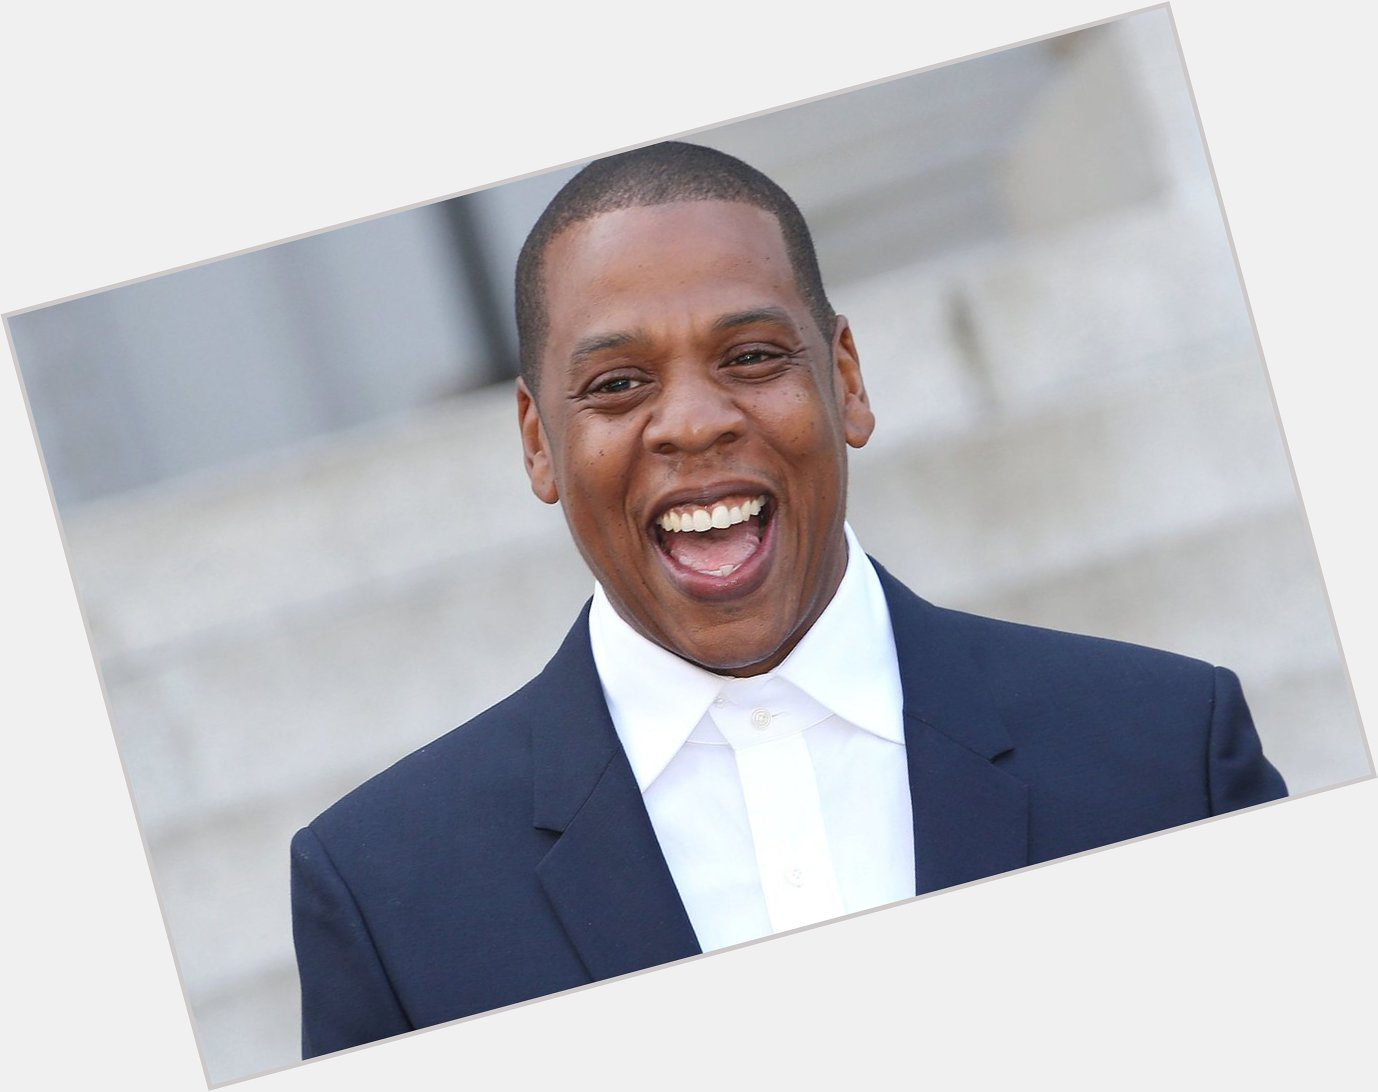 Happy 48th Birthday to one of the greatest to ever do it - Jay Z! 